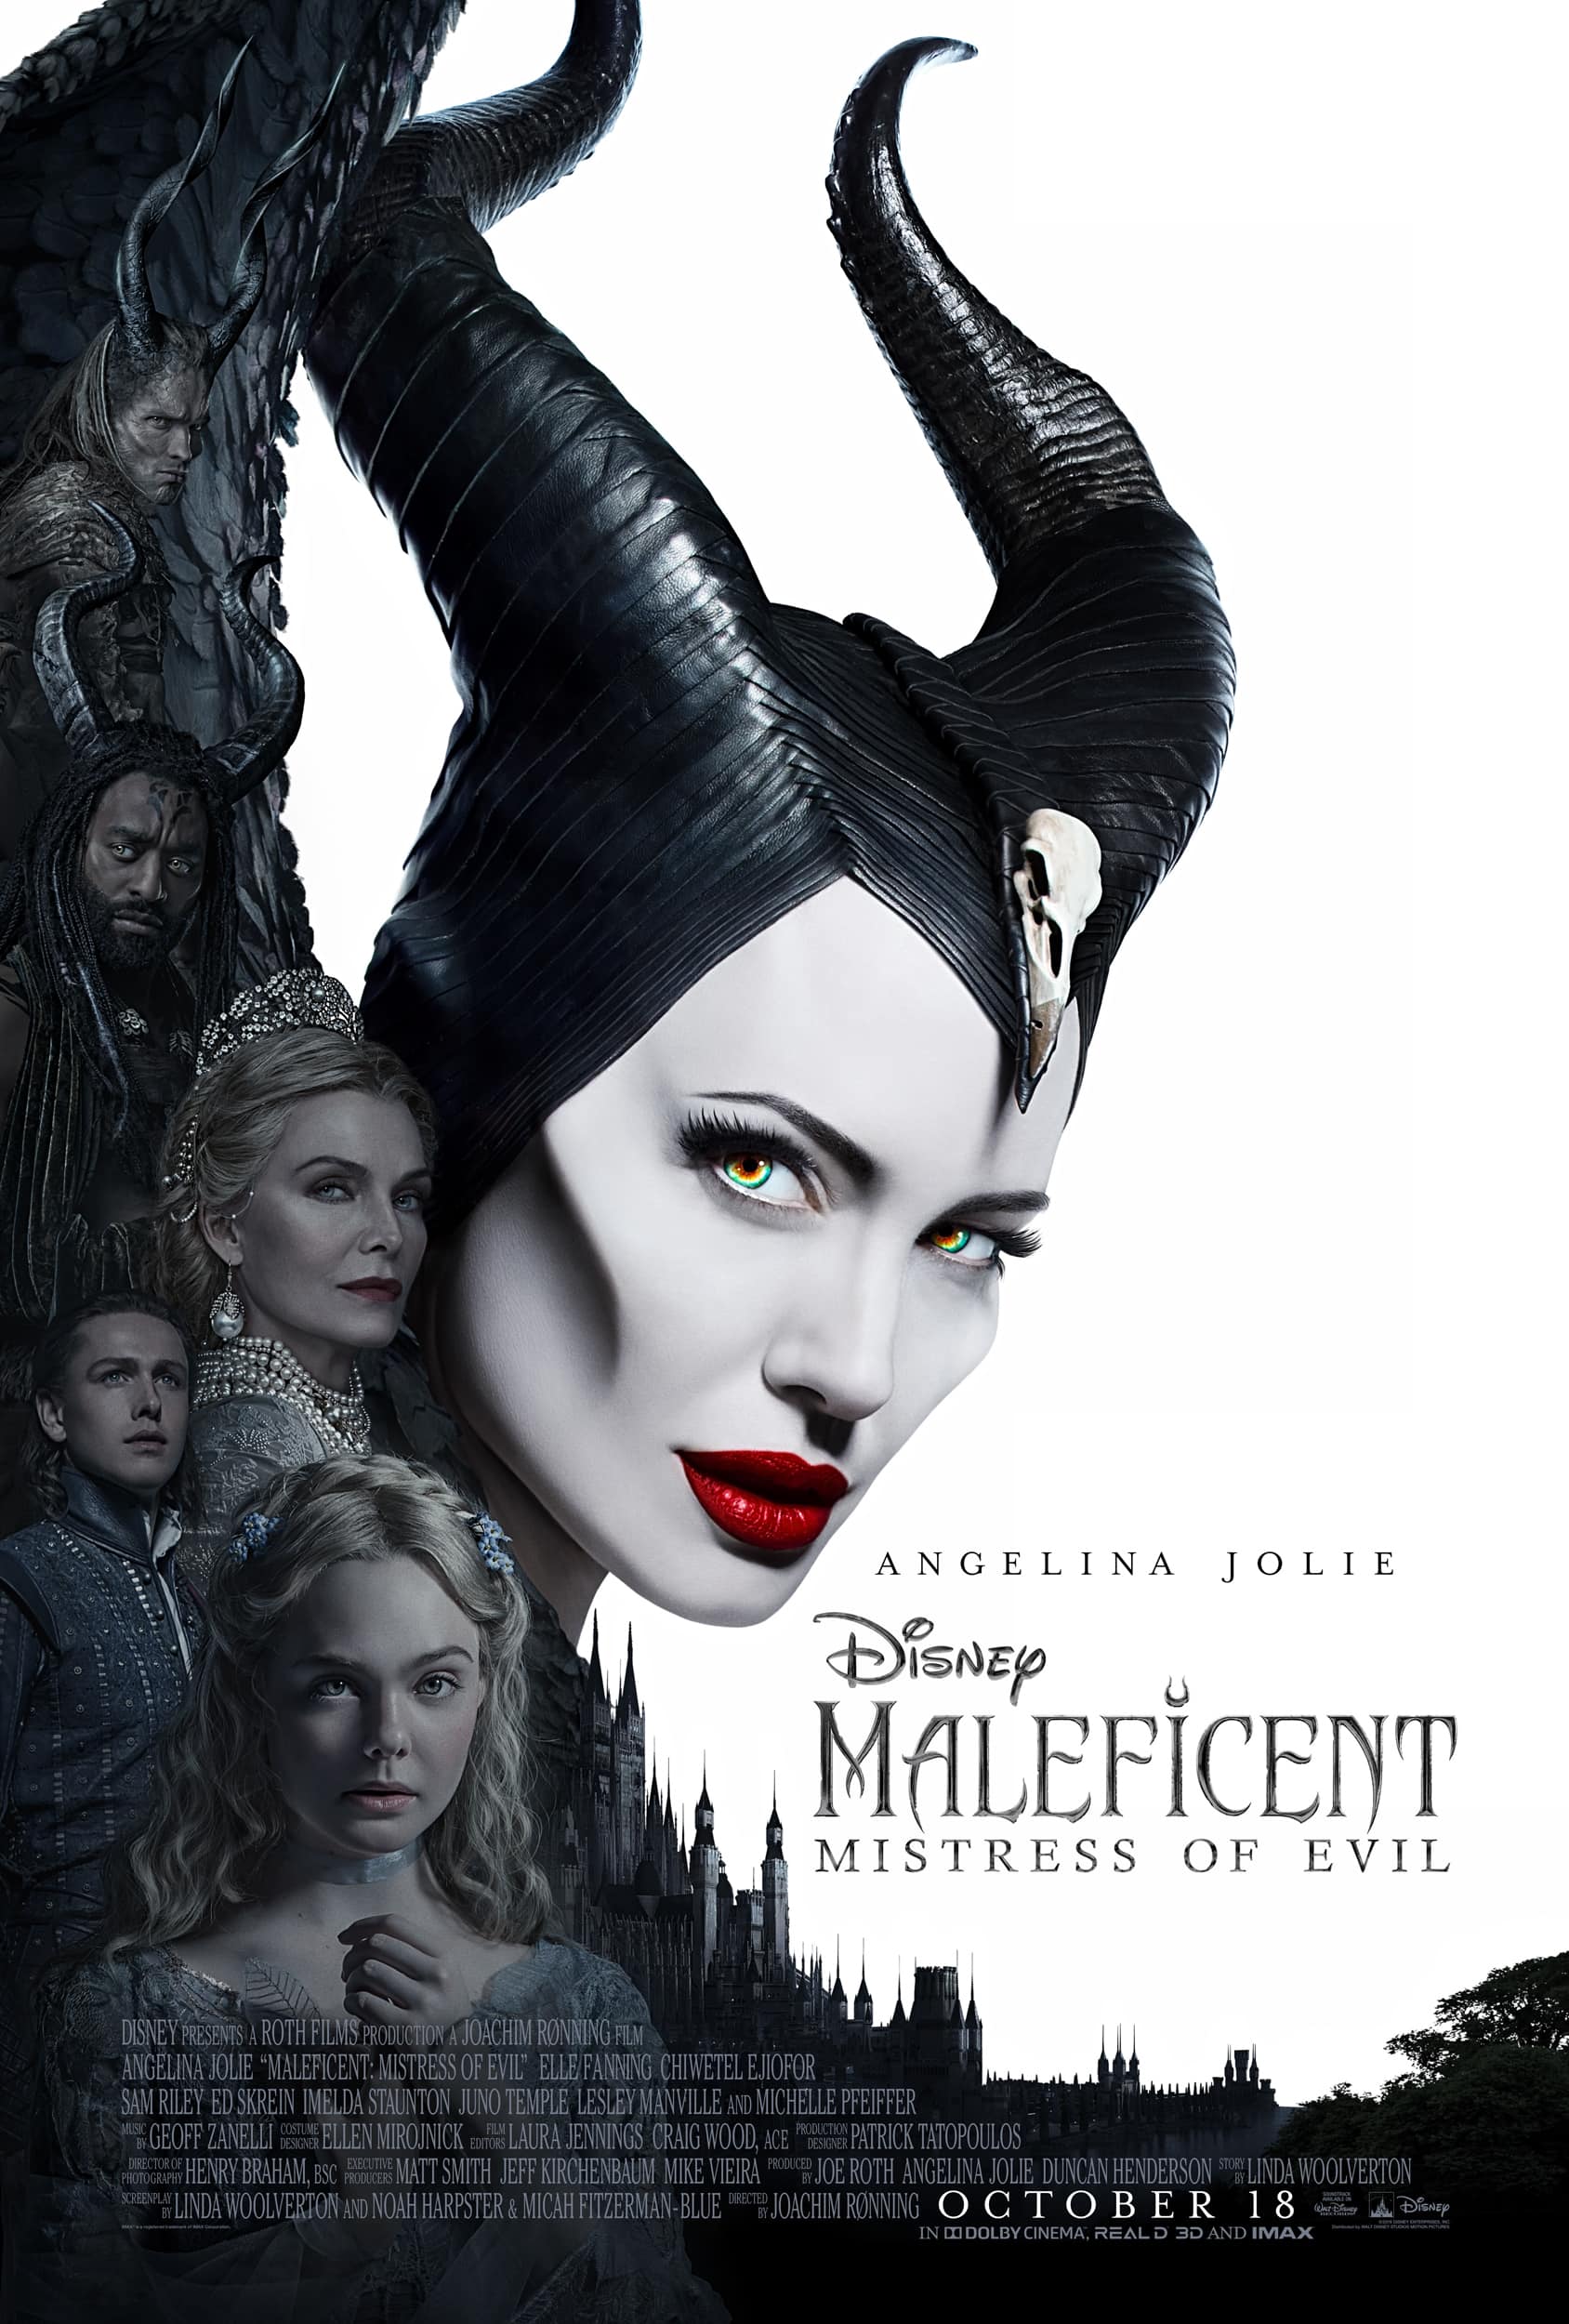 Maleficent Mistress of Evil Review